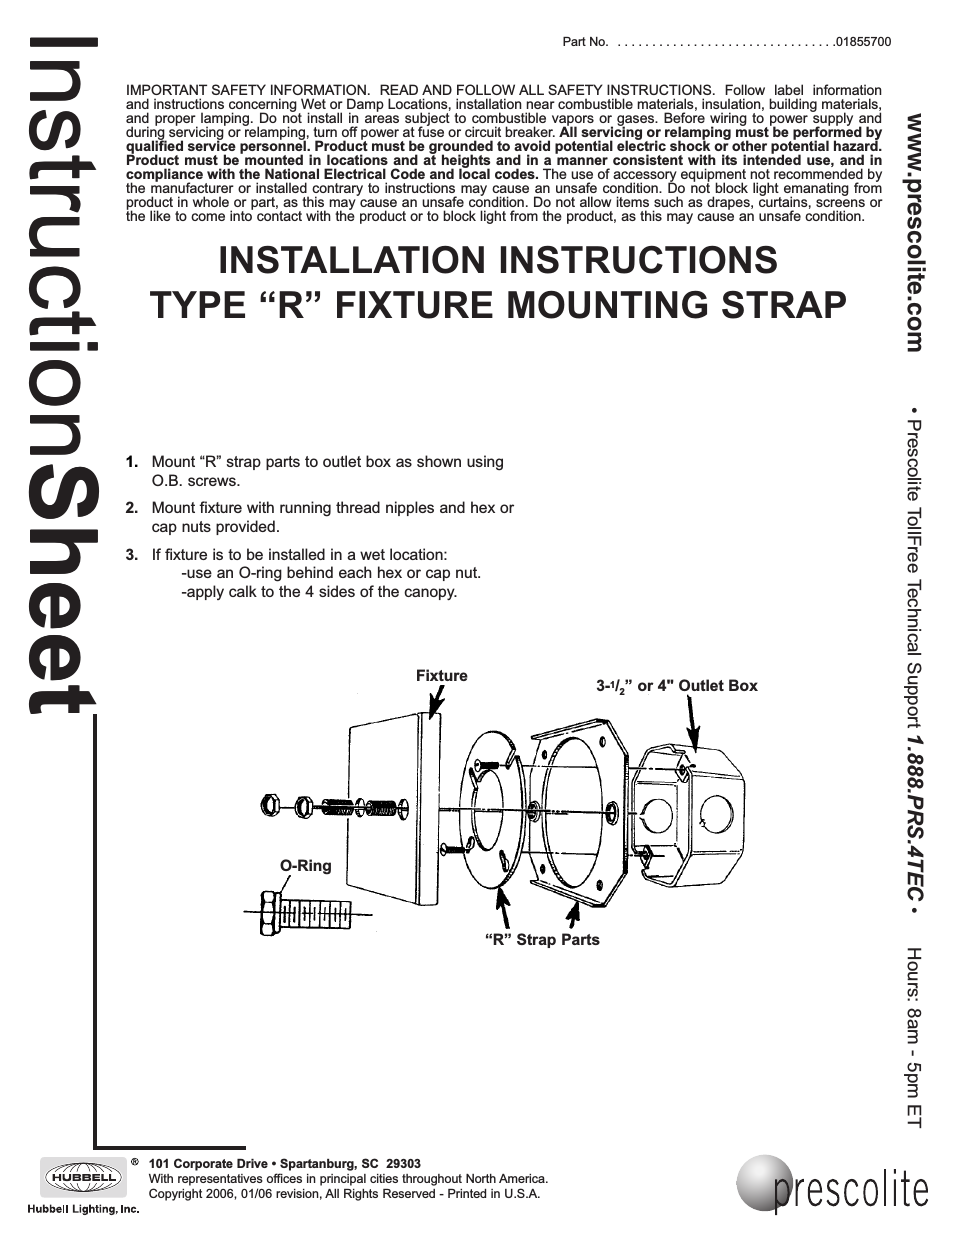 R FIXTURE MOUNTING STRAP